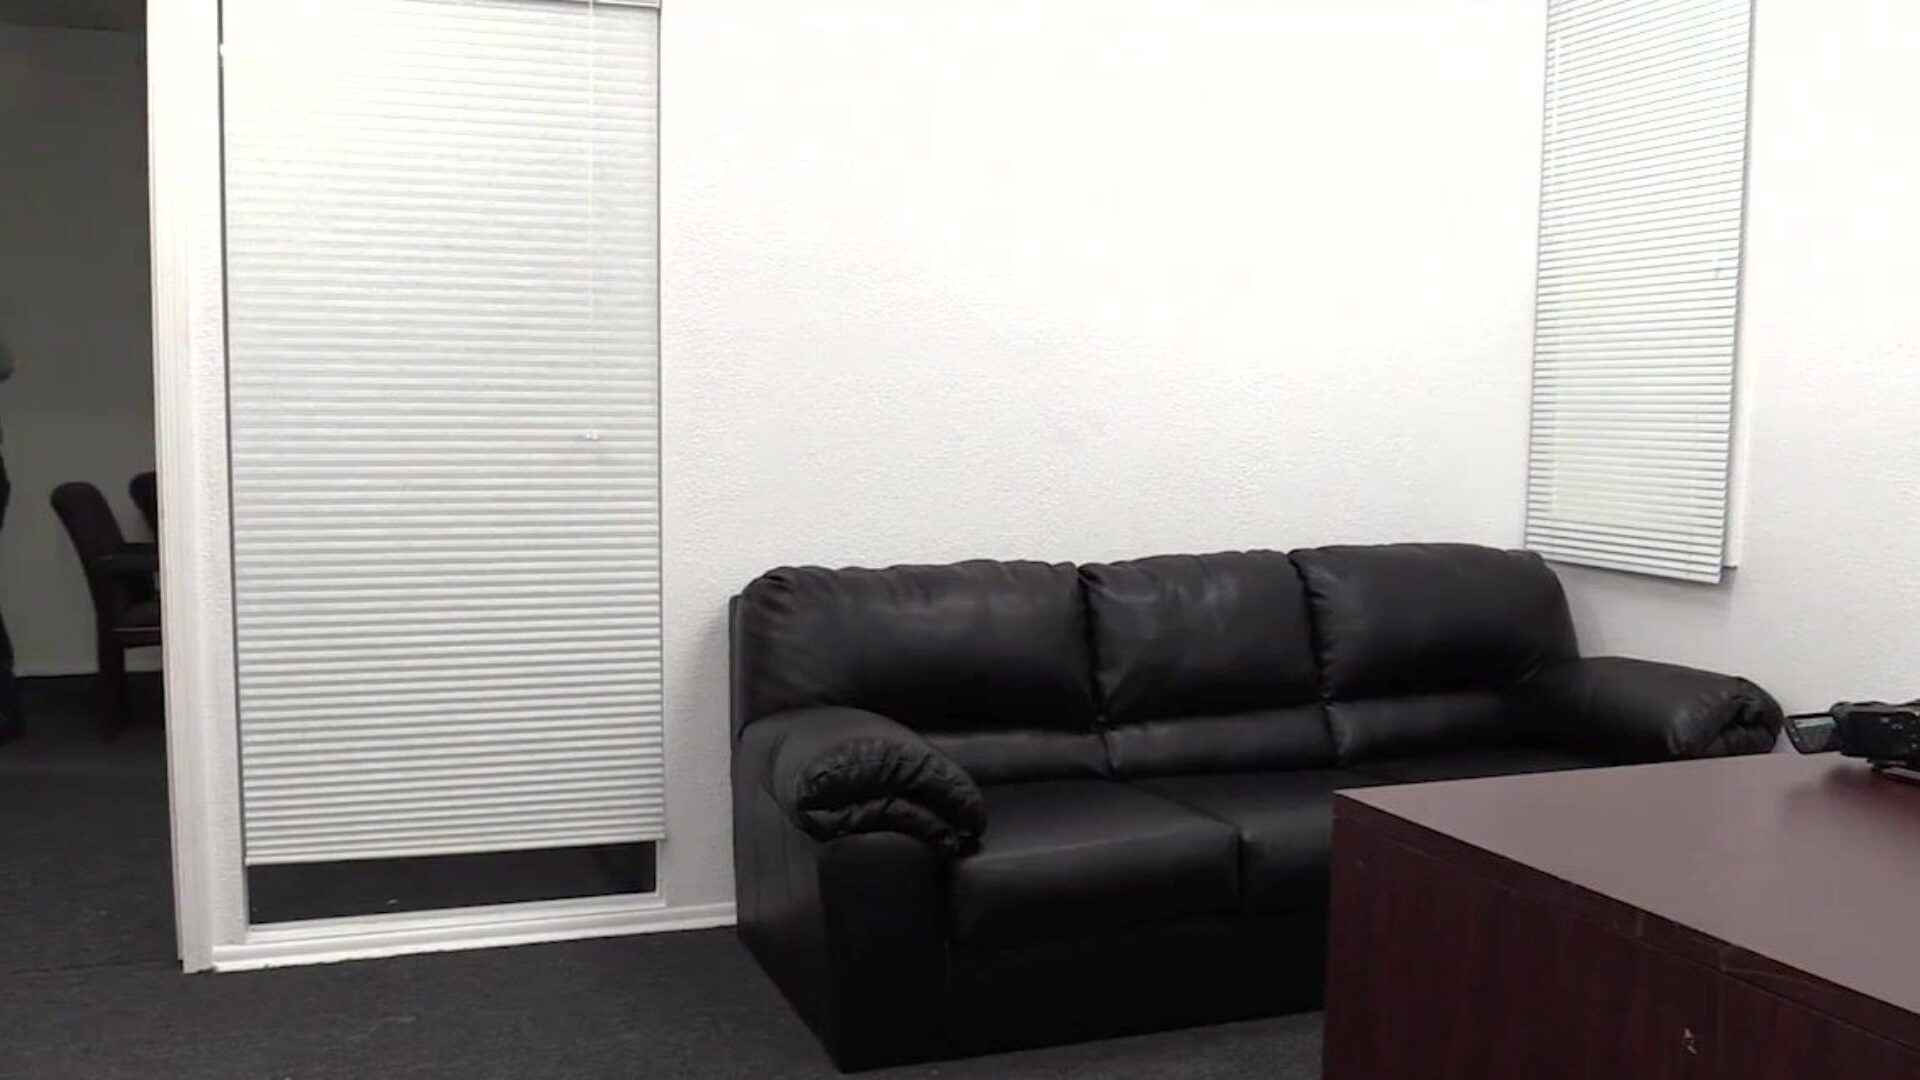 Amie Backroom Casting Couch picture